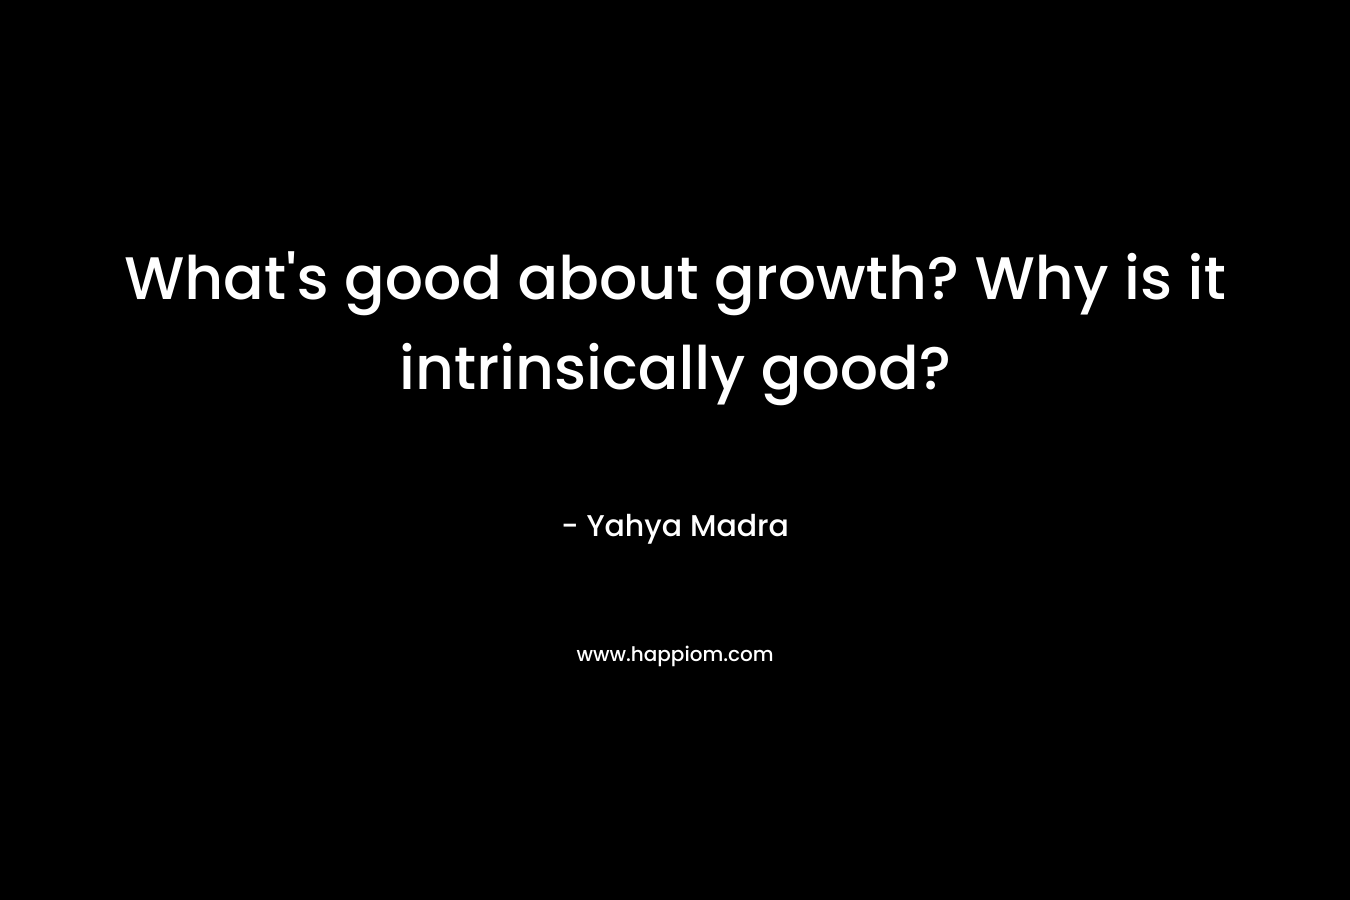 What’s good about growth? Why is it intrinsically good? – Yahya Madra